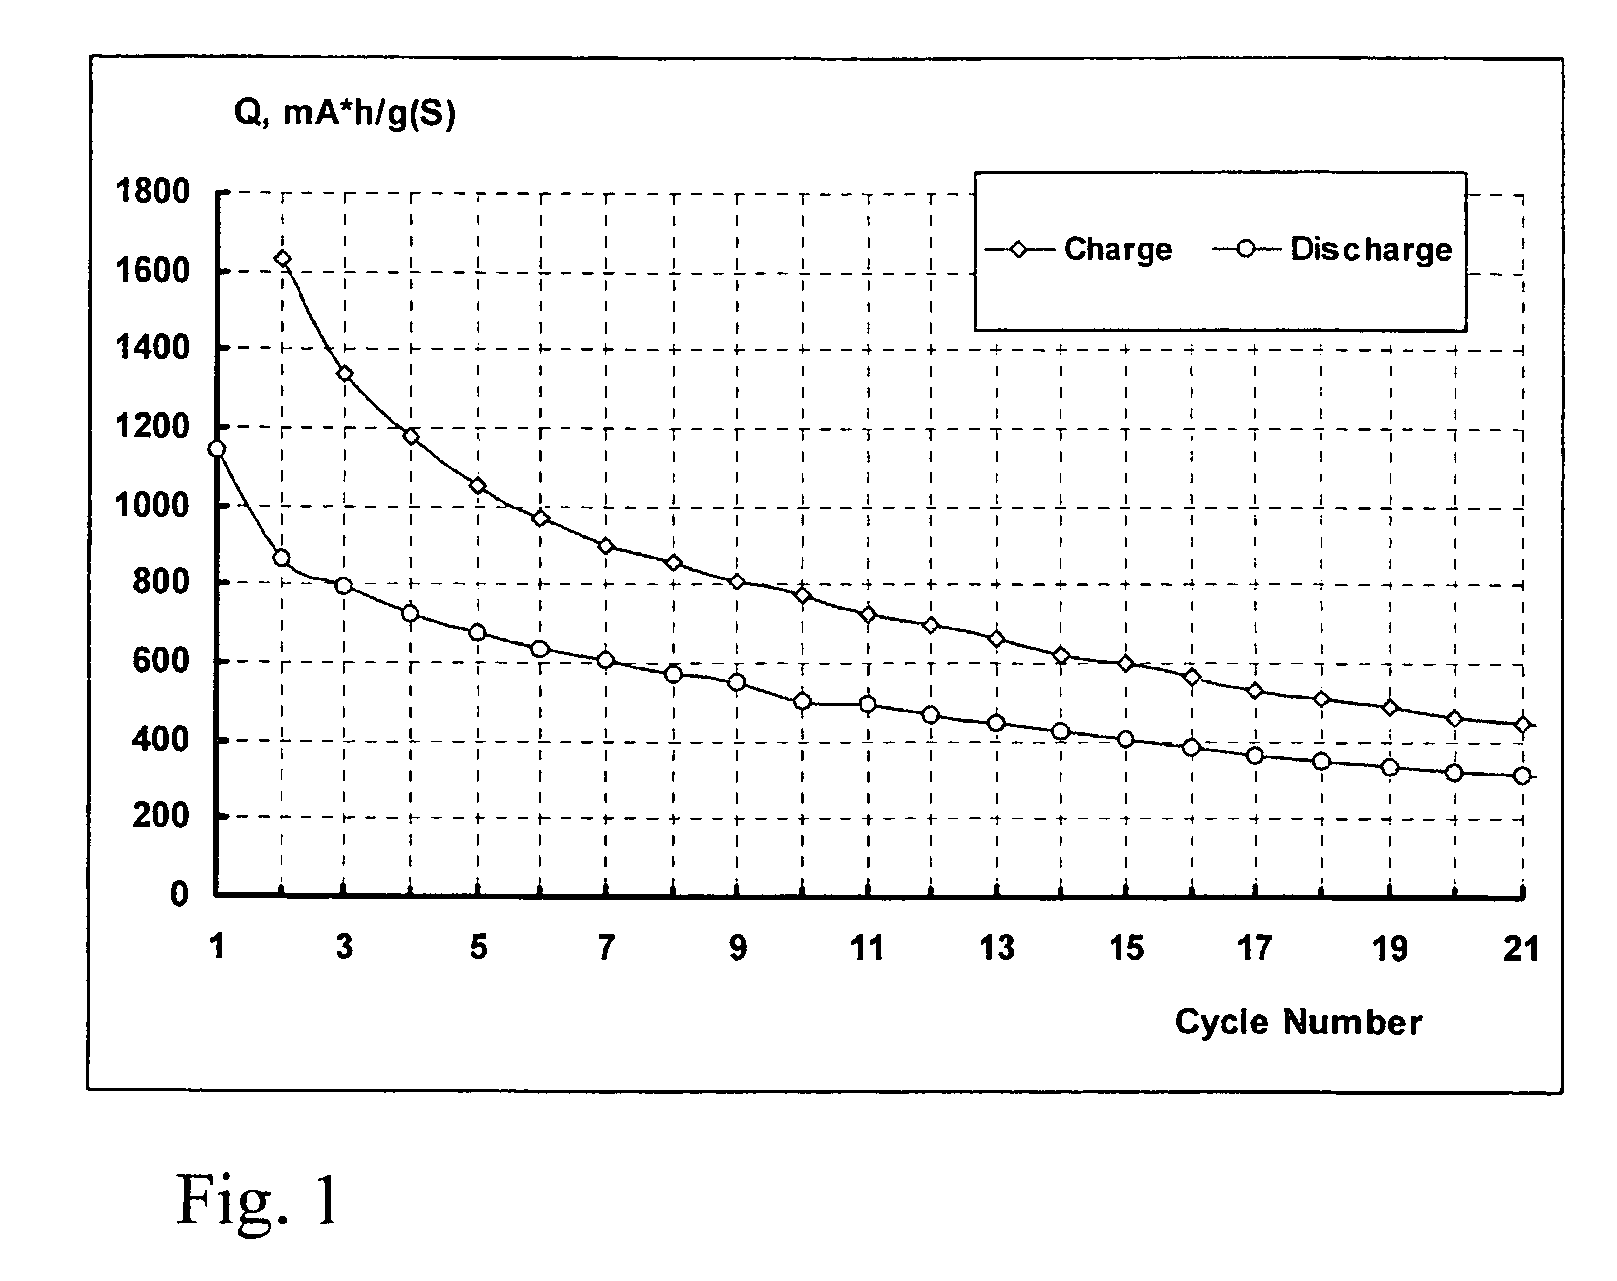 Electrolyte compositions for batteries using sulphur or sulphur compounds